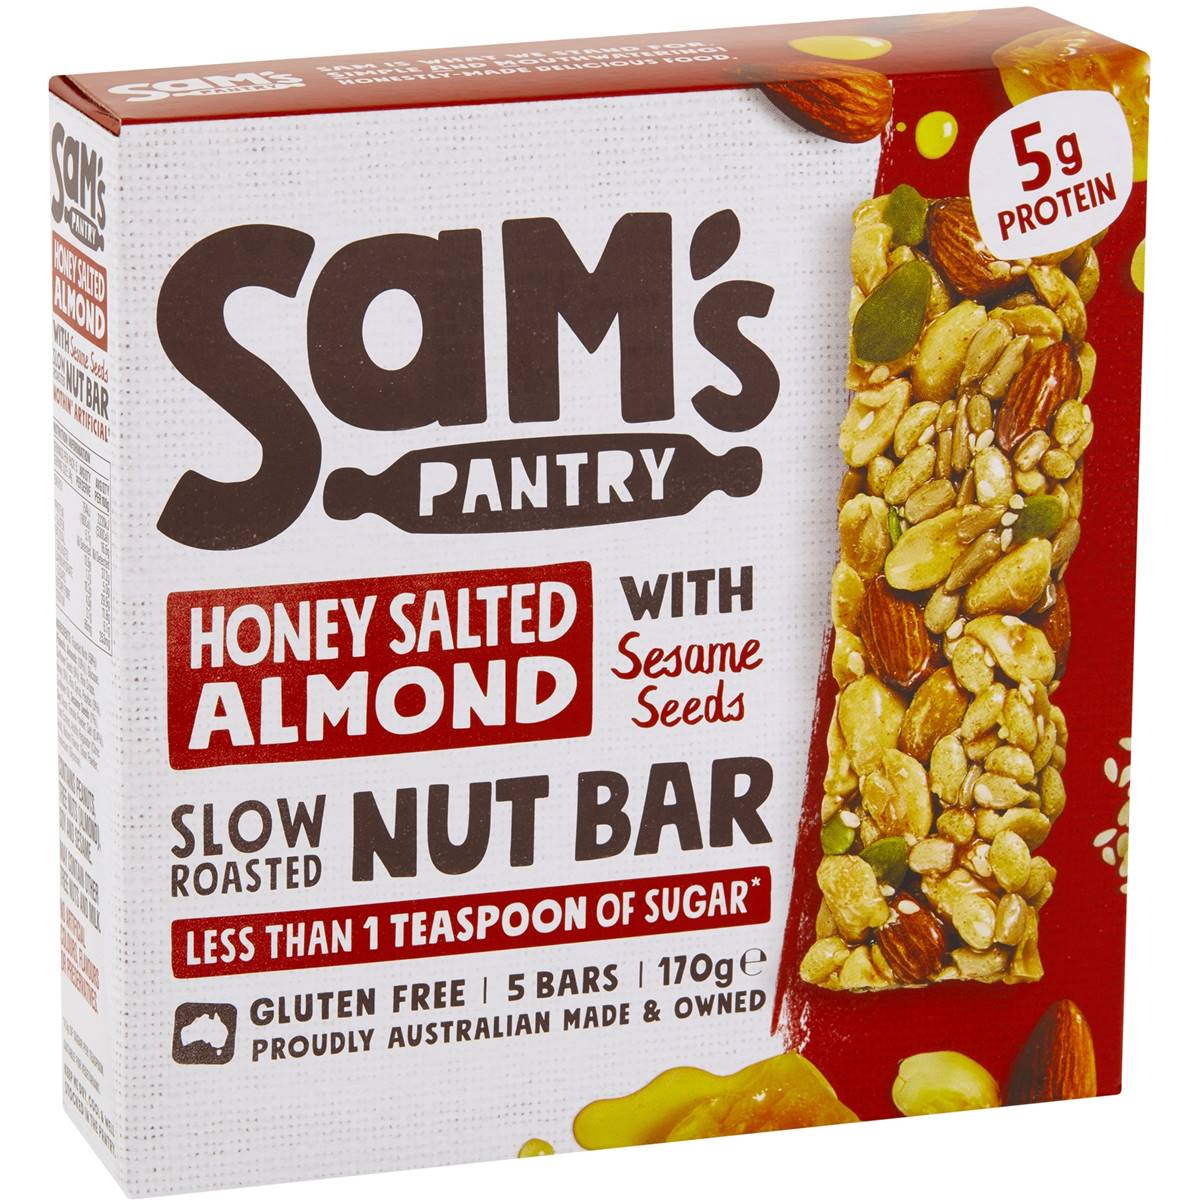 Calories in Sam's Pantry Honey Salted Almond Nut Bar